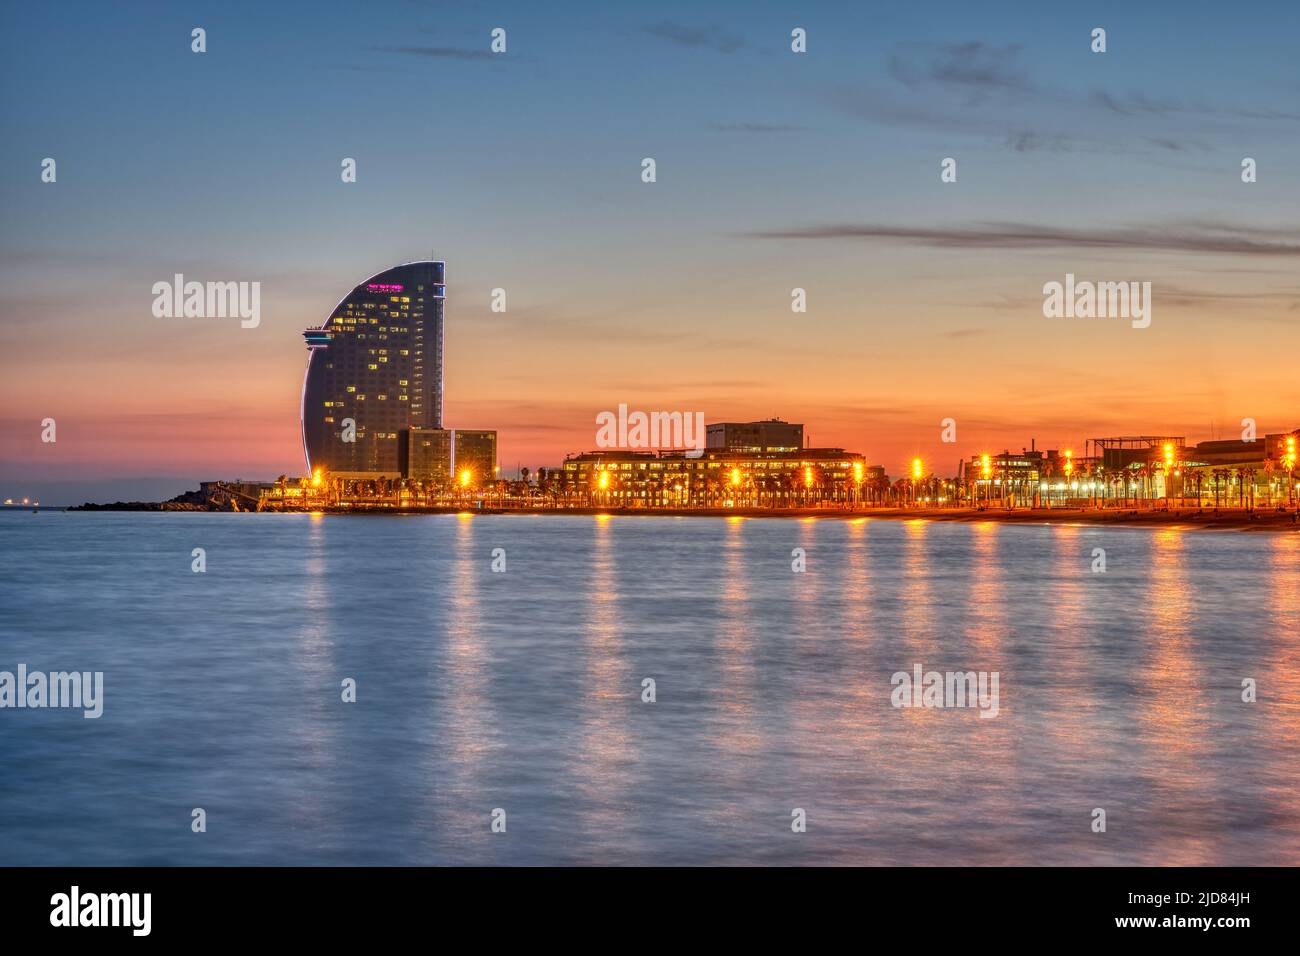 Barceloneta beach in Barcelona with the iconic skyscraper after sunset Stock Photo